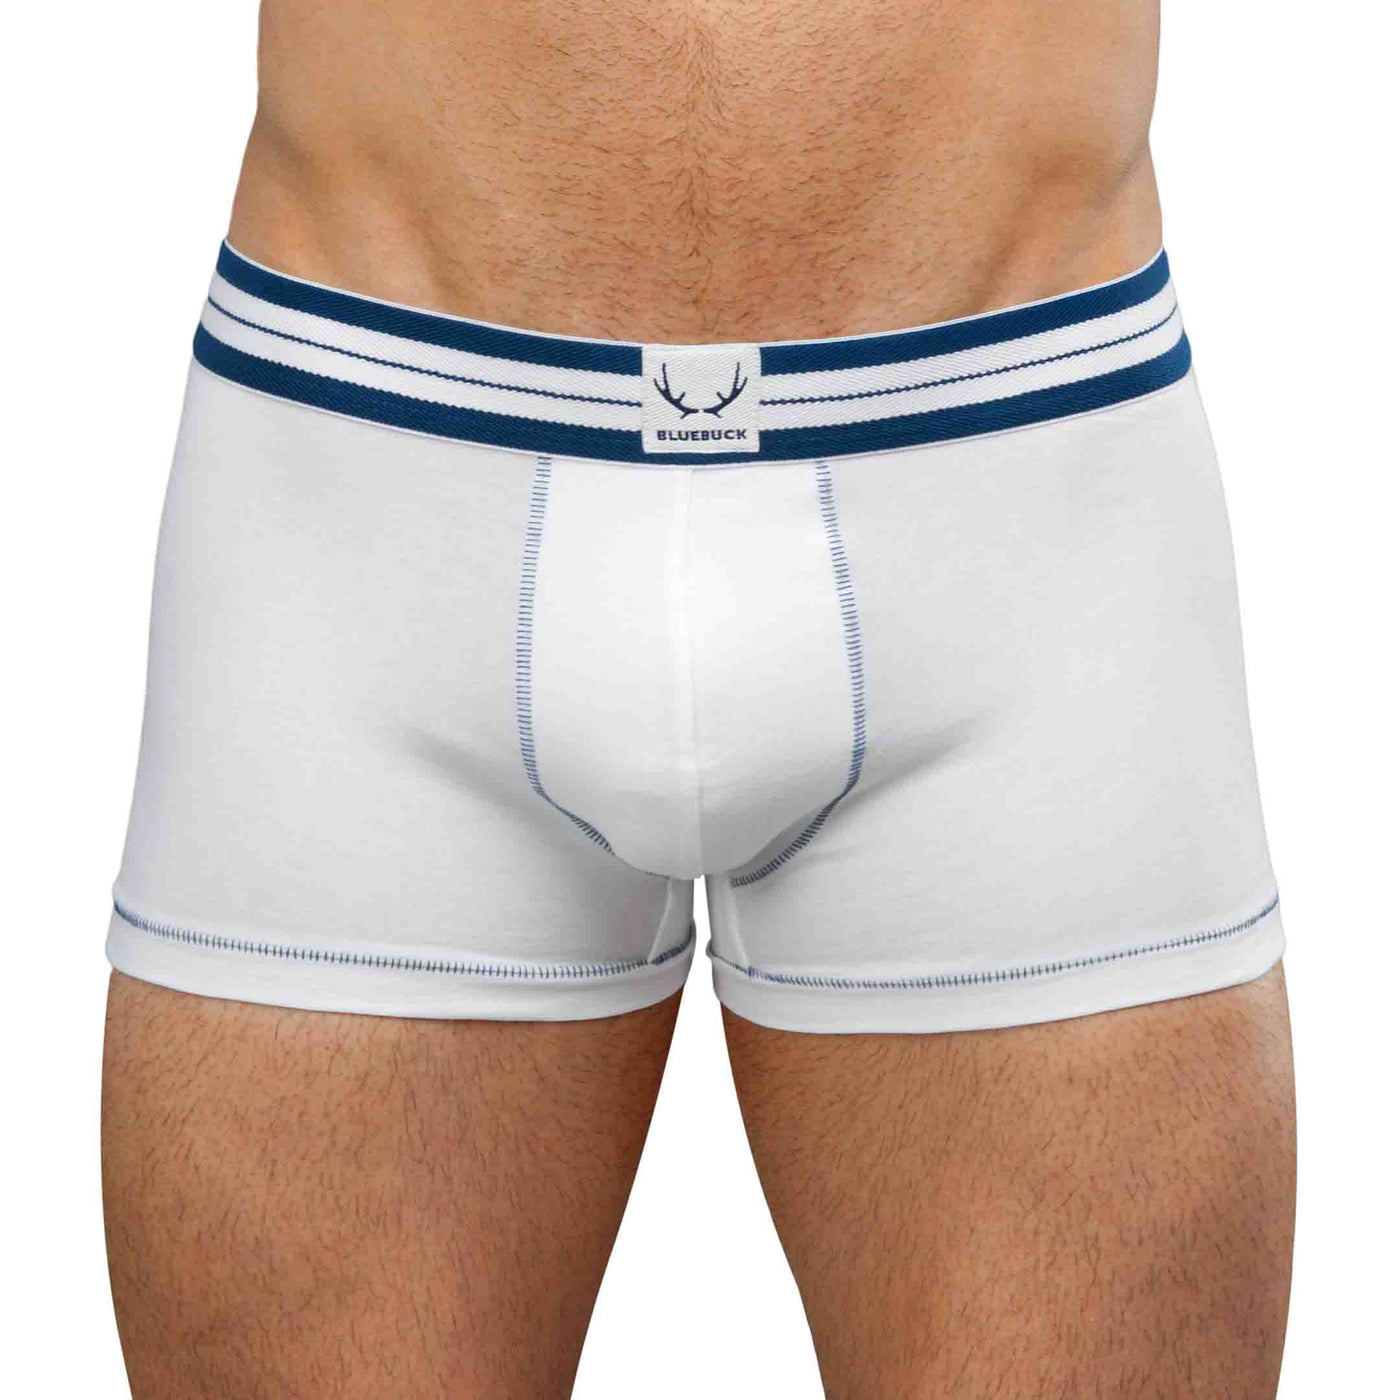 White organic cotton men's trunks with navy stitching